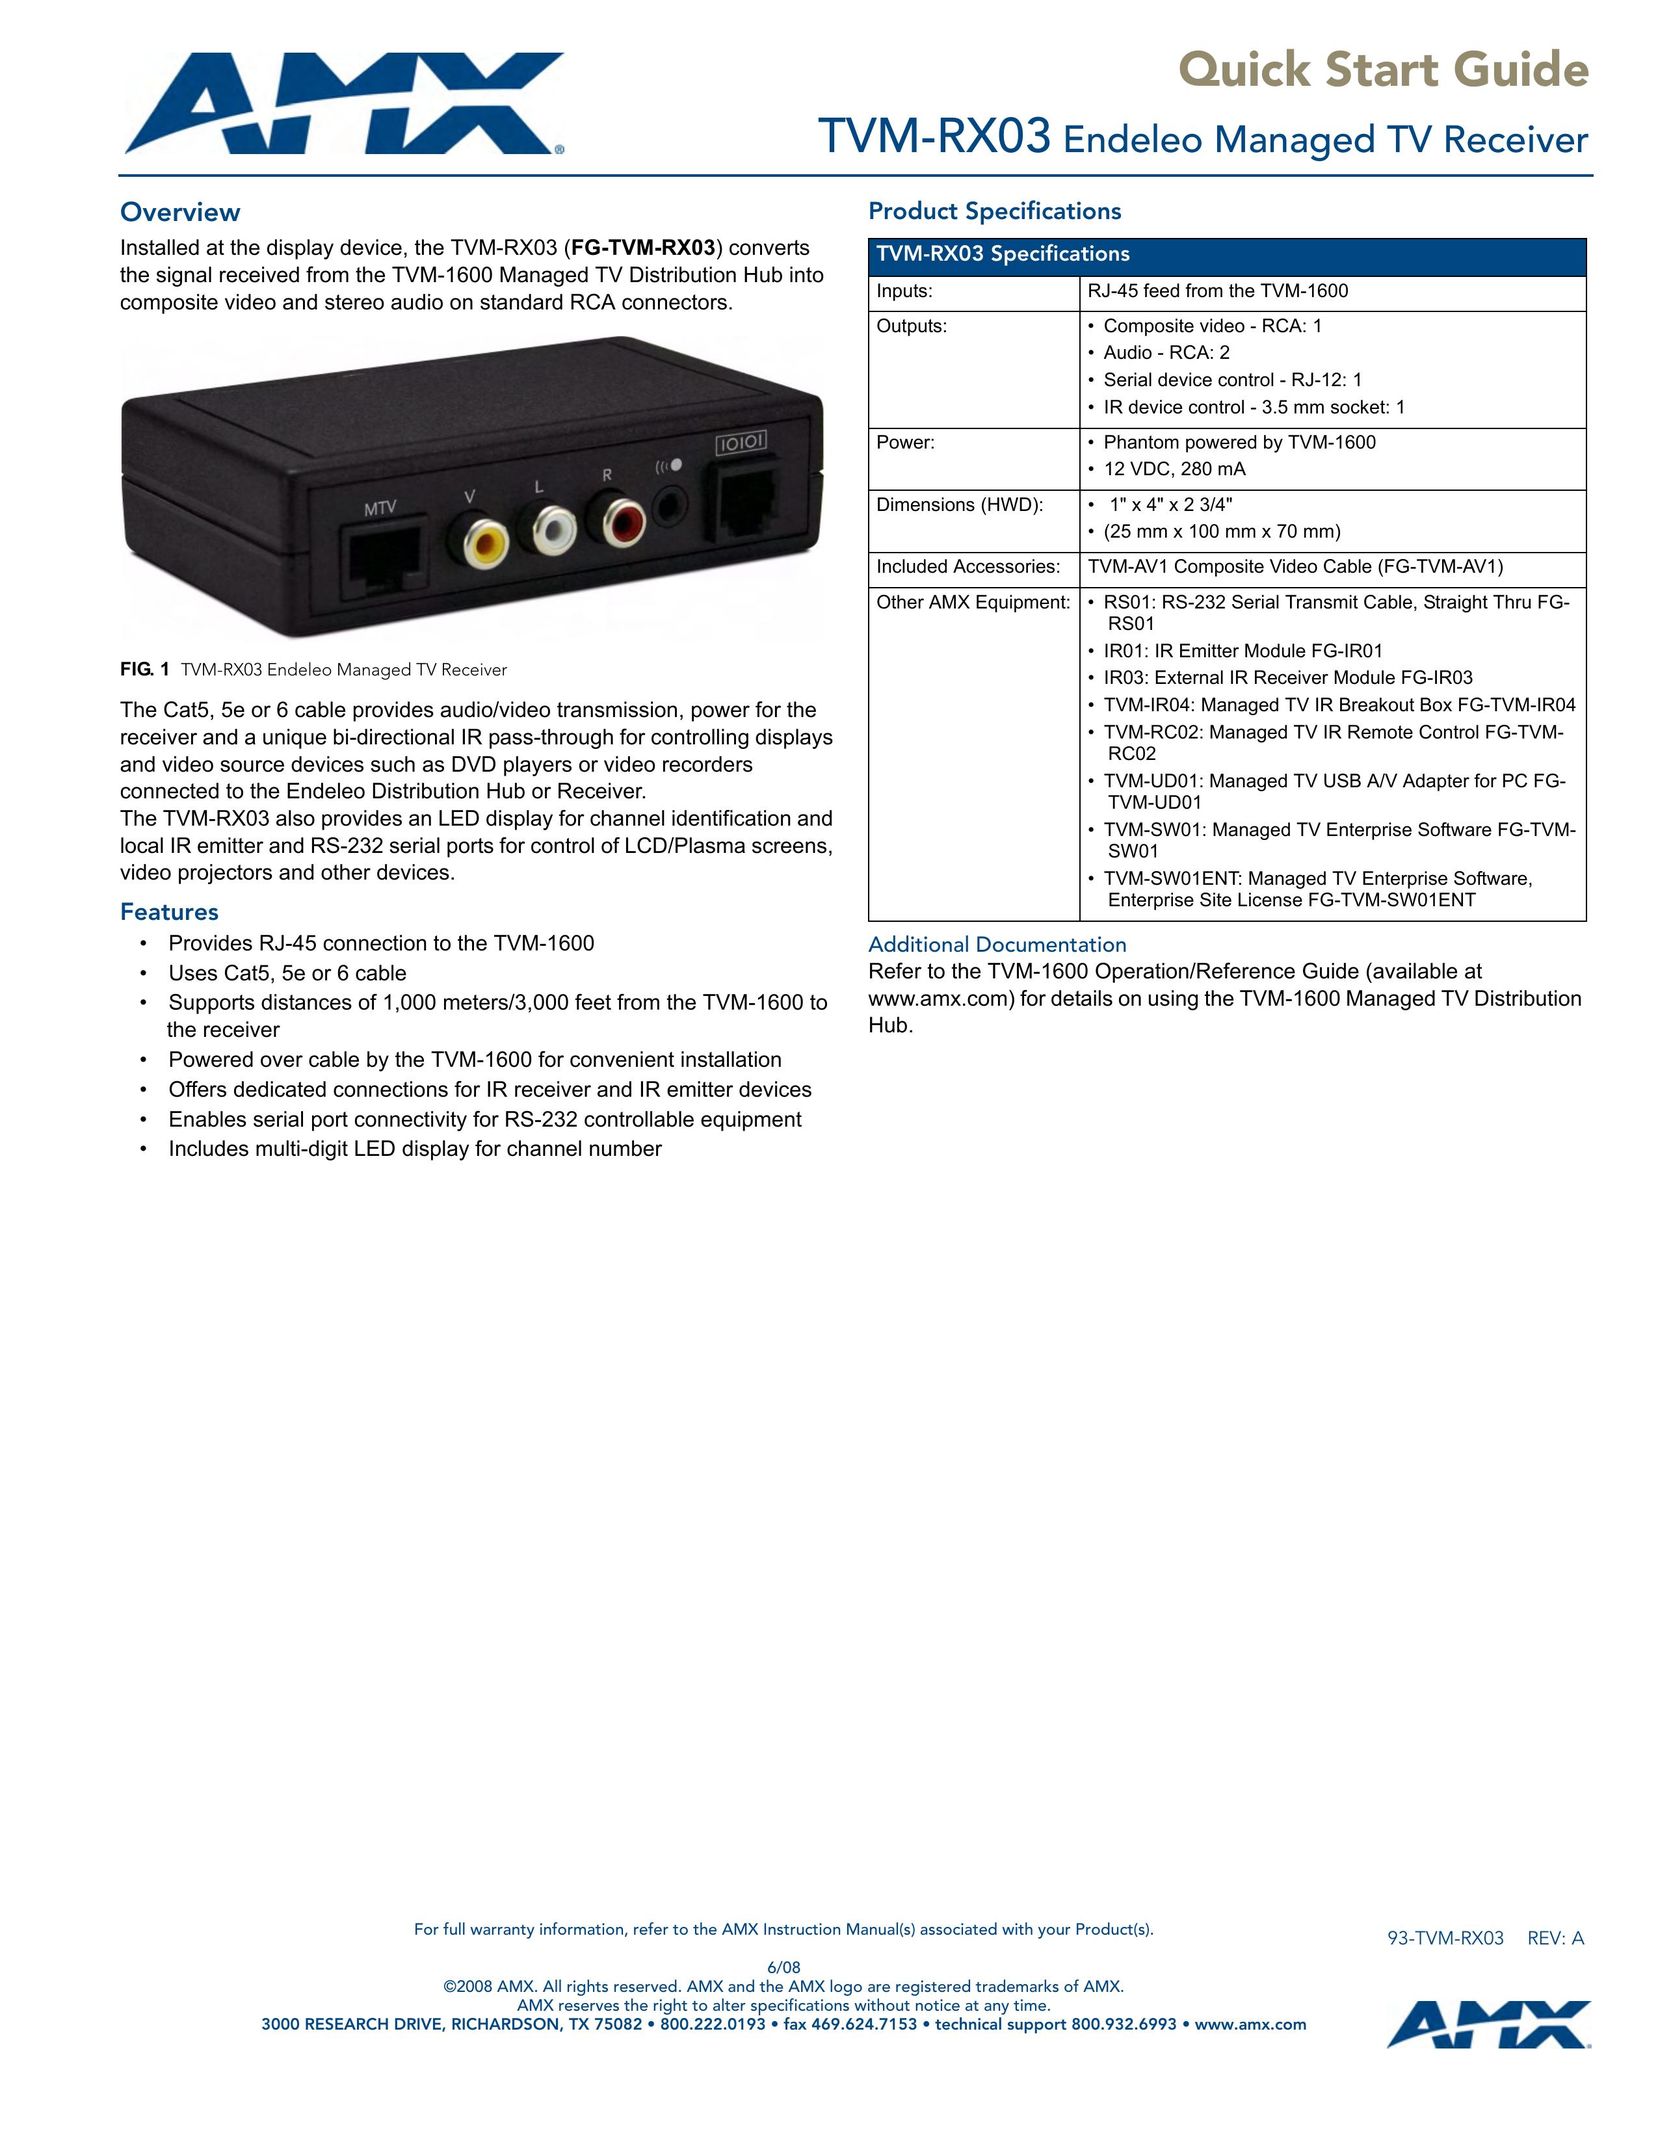 AMX TVM-RX03 Stereo Receiver User Manual